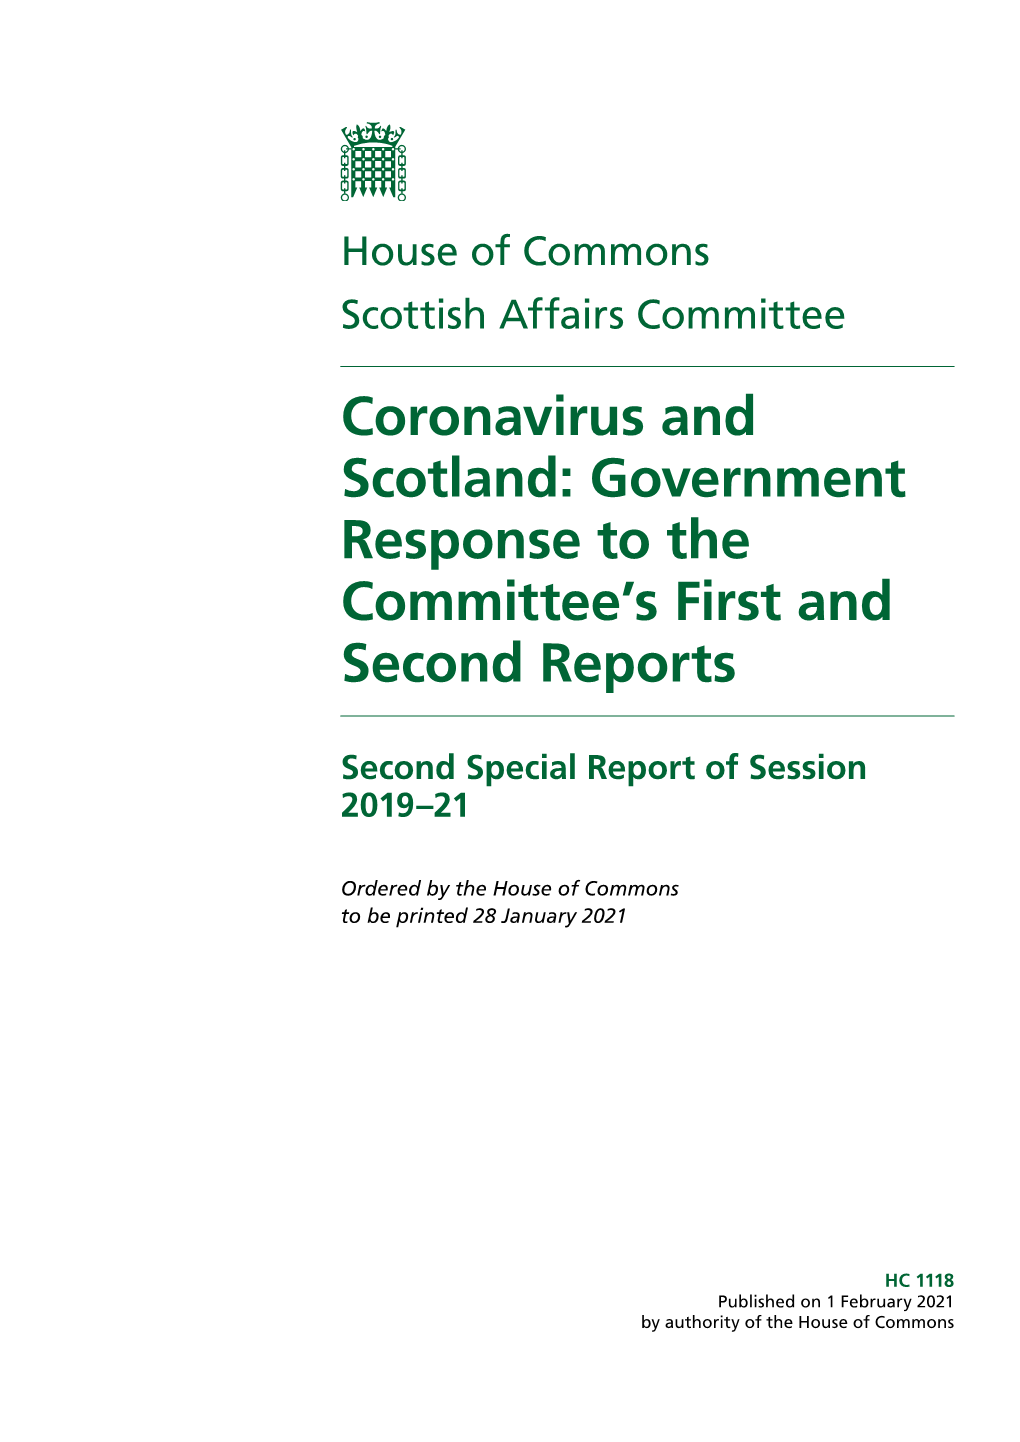 Coronavirus and Scotland: Government Response to the Committee’S First and Second Reports